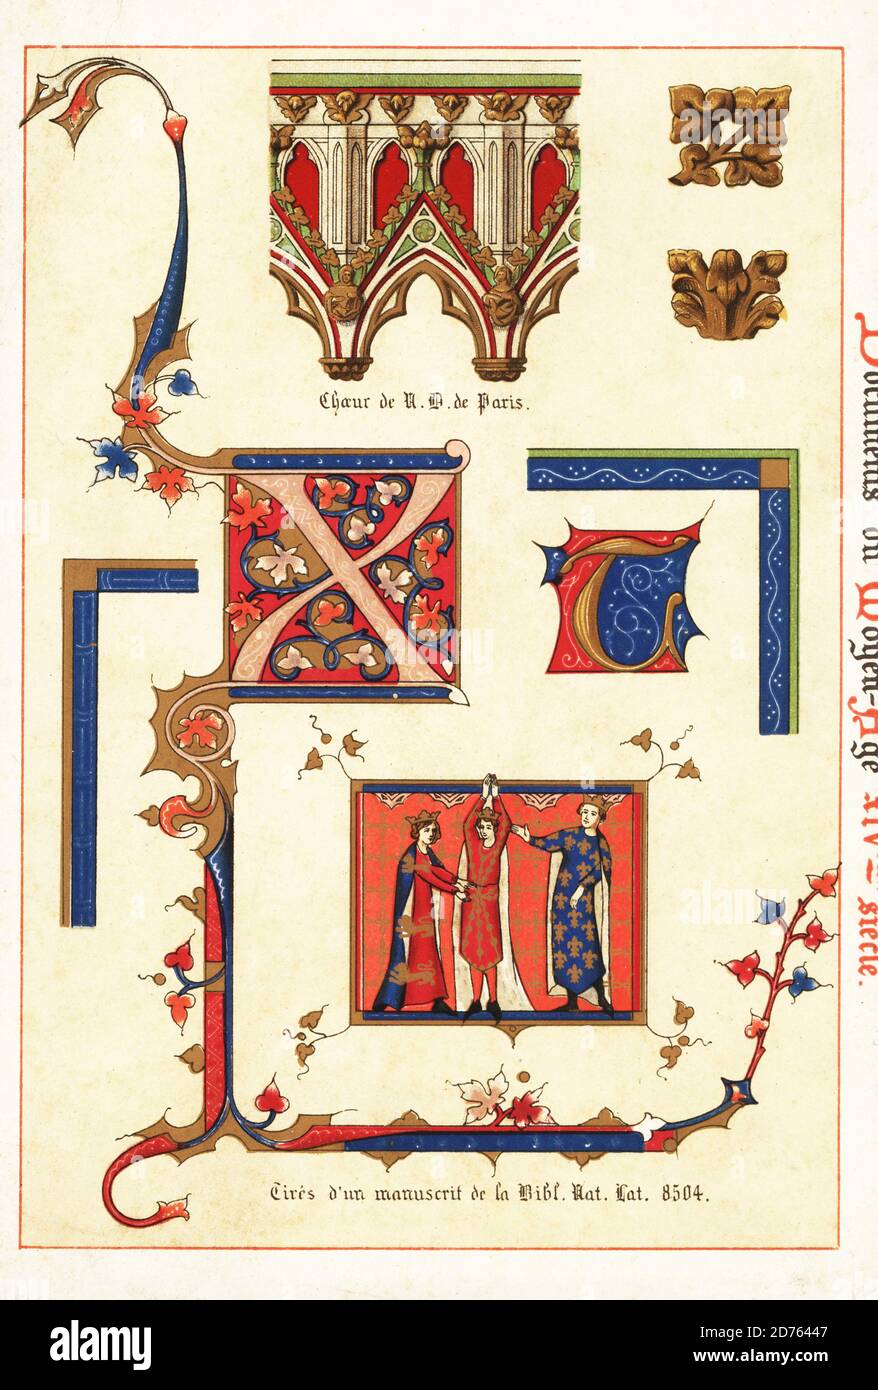 Painted carving from the choir at Notre Dame de Paris, and fancy initials X and T, scene with three crowned figures in armorial tunics, from a 14th century manuscript, fabula romanensis de Calila et Dina, by Raymundo de Biterris, in the Bibliotheque National No. 8504.. Choeur de ND de Paris, Tires d’un manuscrit de la Bibl. Nat. Lat. 8504. Chromolithograph designed and lithographed by Ernst Guillot from his Ornementation des Manuscrits au Moyen-Age (Ornamentation from Manuscripts of the Middle Ages), Paris, 1897. Stock Photo